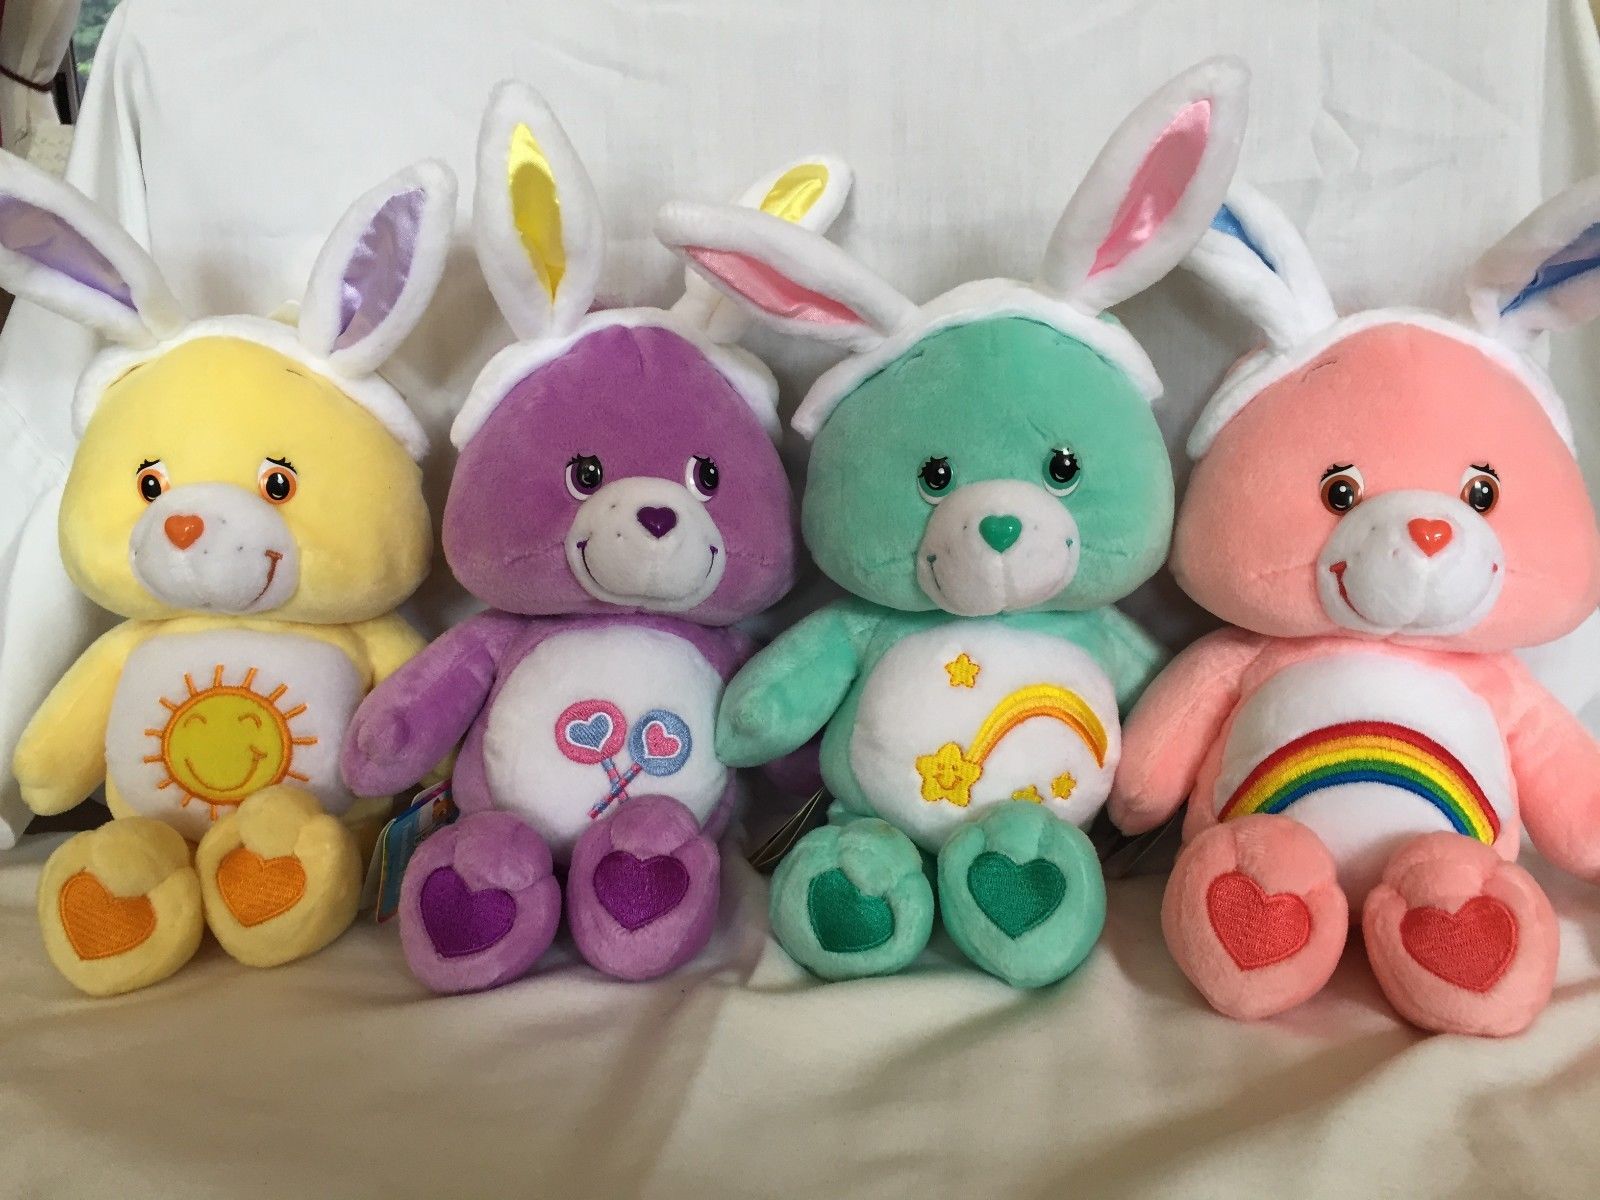 Lot of 4 - NWT - 2003 Care Bears 10 Inch Plush Easter Bunny Wish, Share, Cheer &